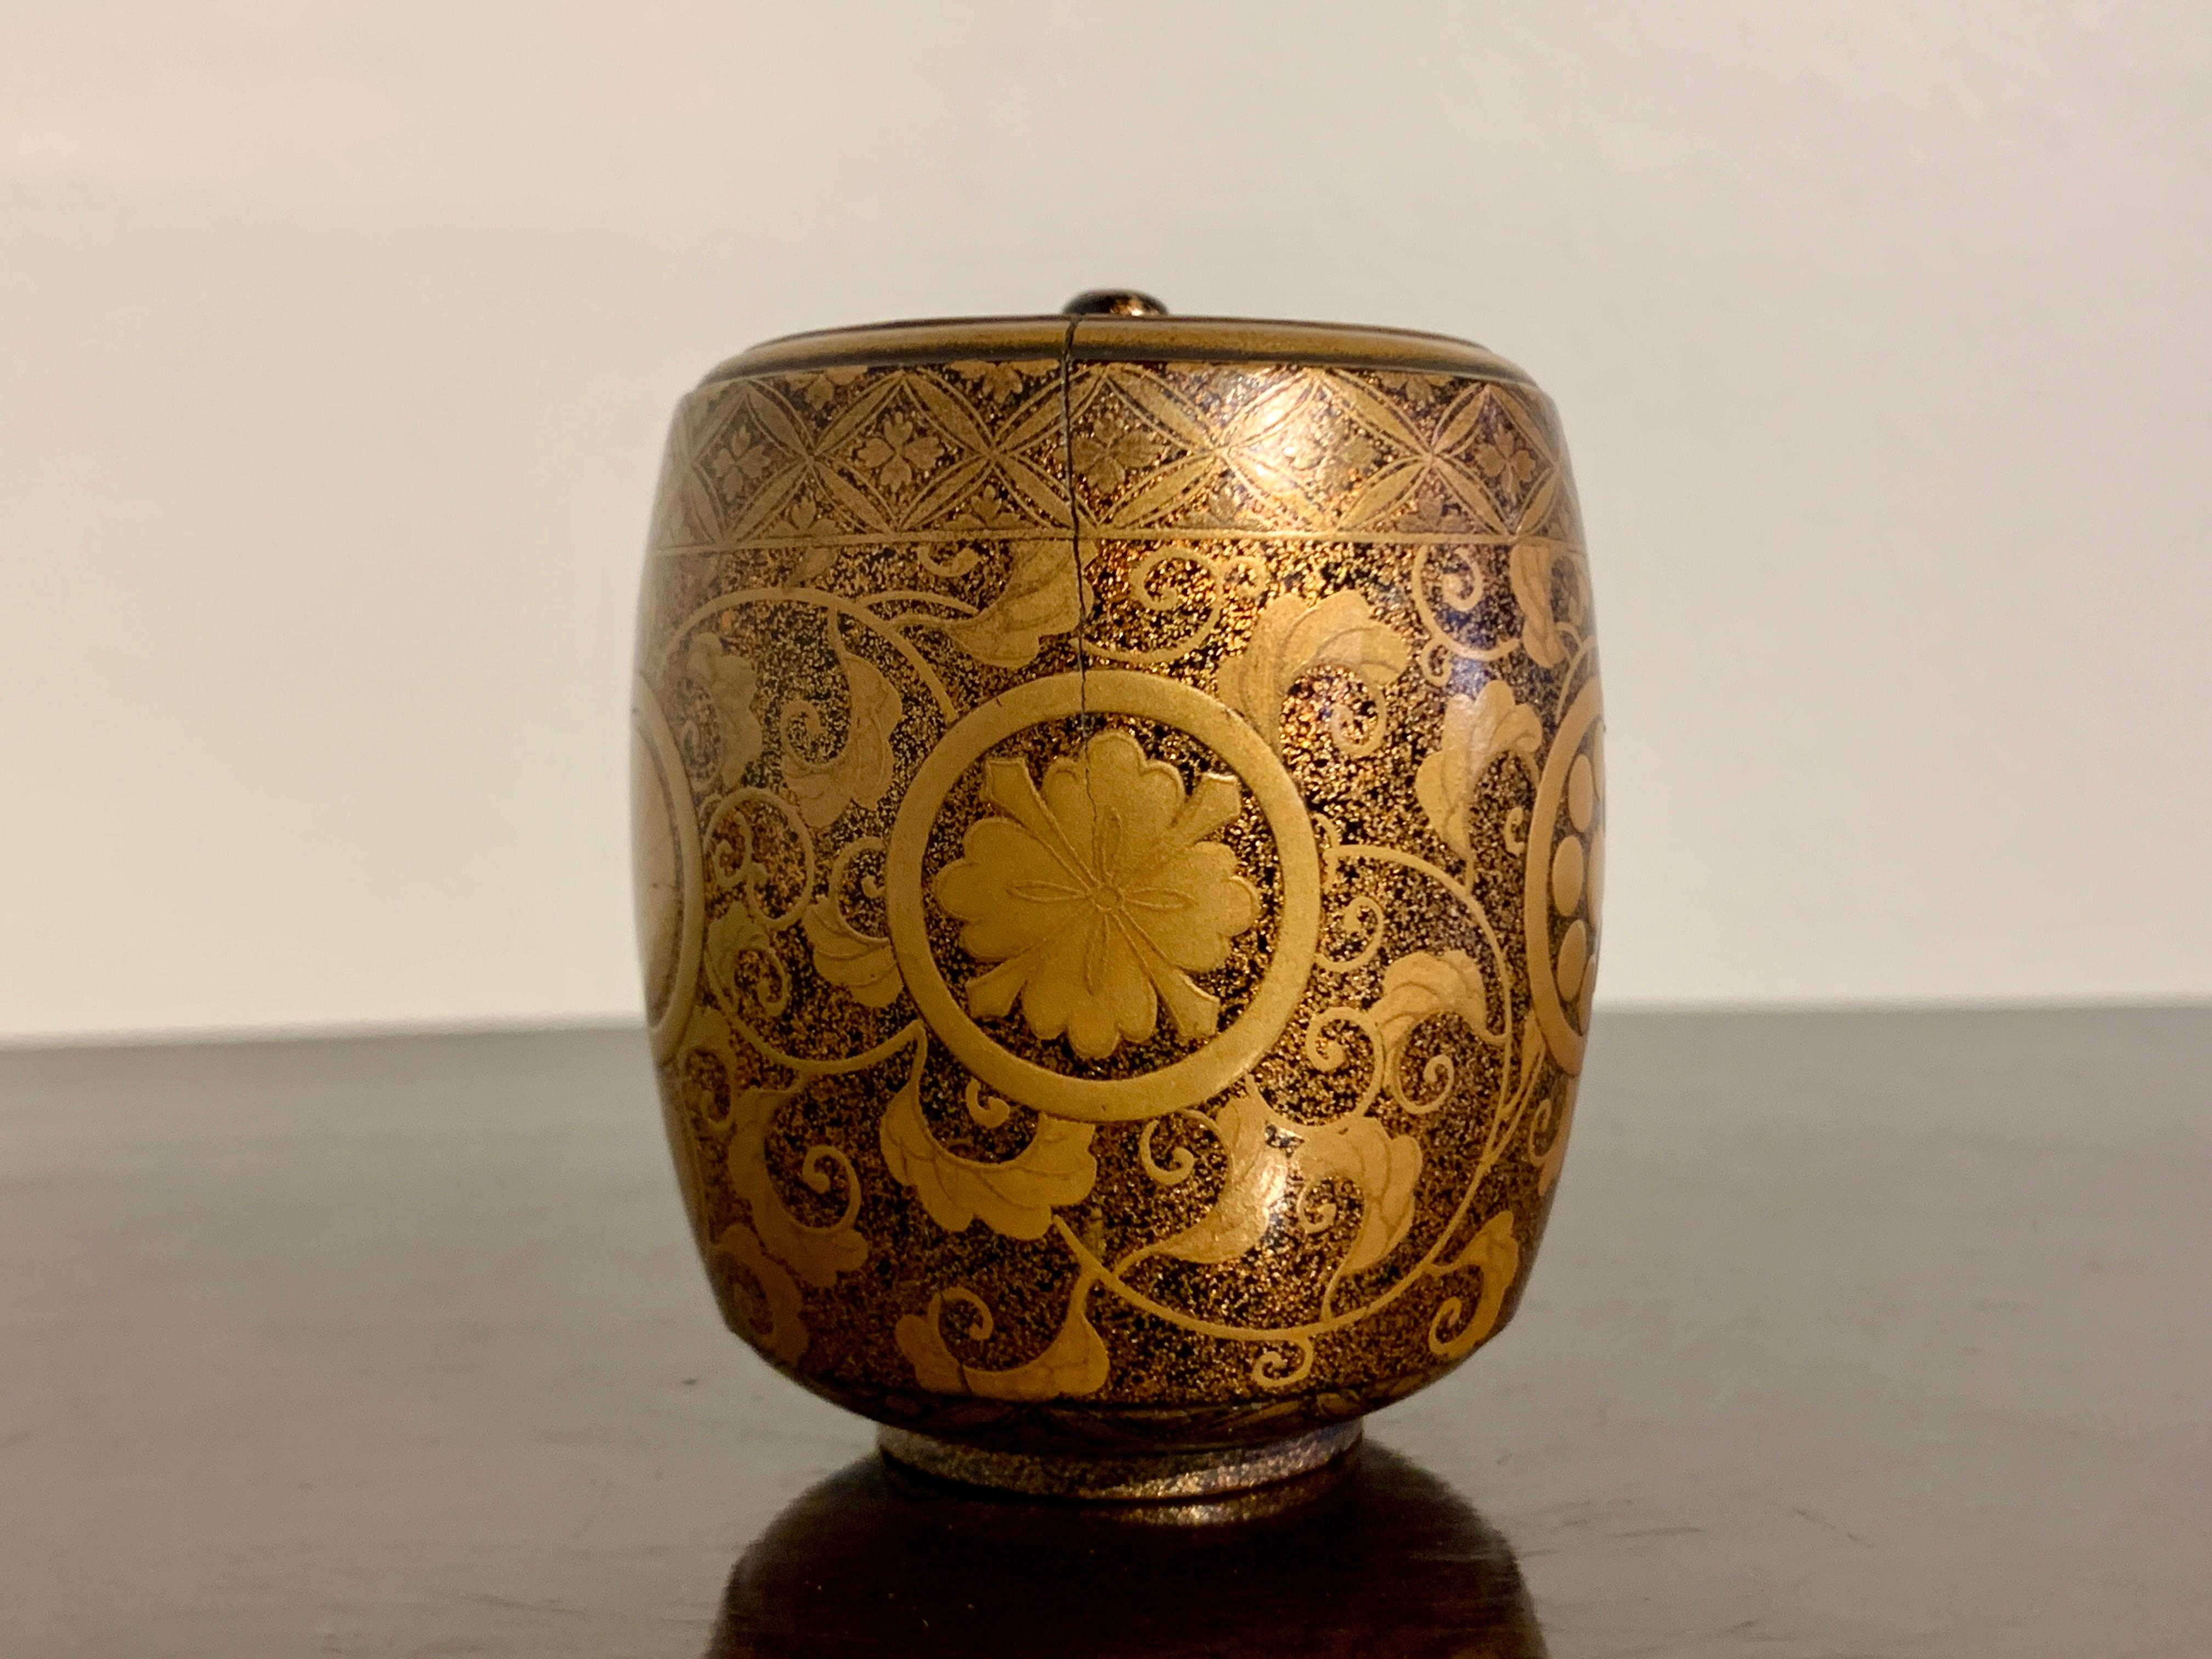 A refined Japanese lacquer and bronze koro, incense burner, in the form or a chaire, tea caddy, decorated with various mon, family crests, Edo period (1603 - 1868), early 19th century, Japan. 

The incense burner, called a koro in Japanese, formed